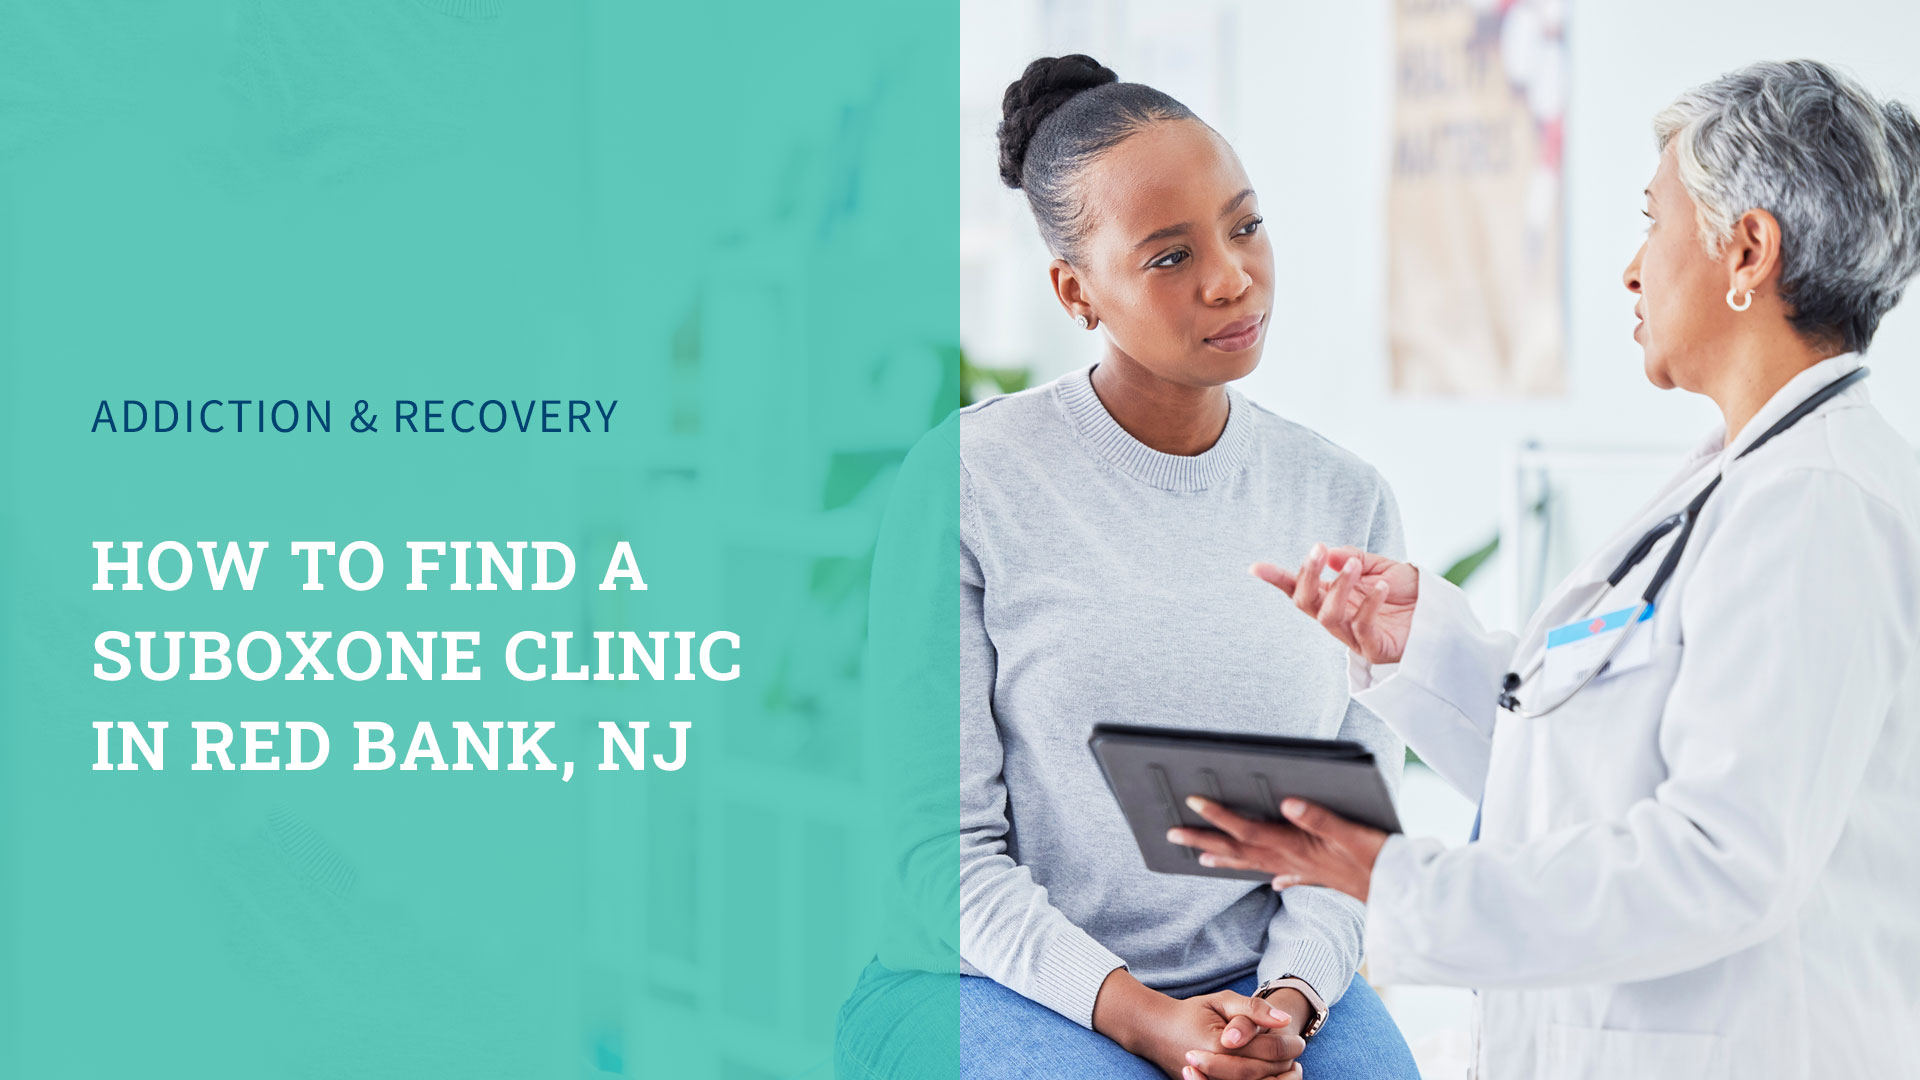 How to Find a Suboxone Clinic in Red Bank, NJ